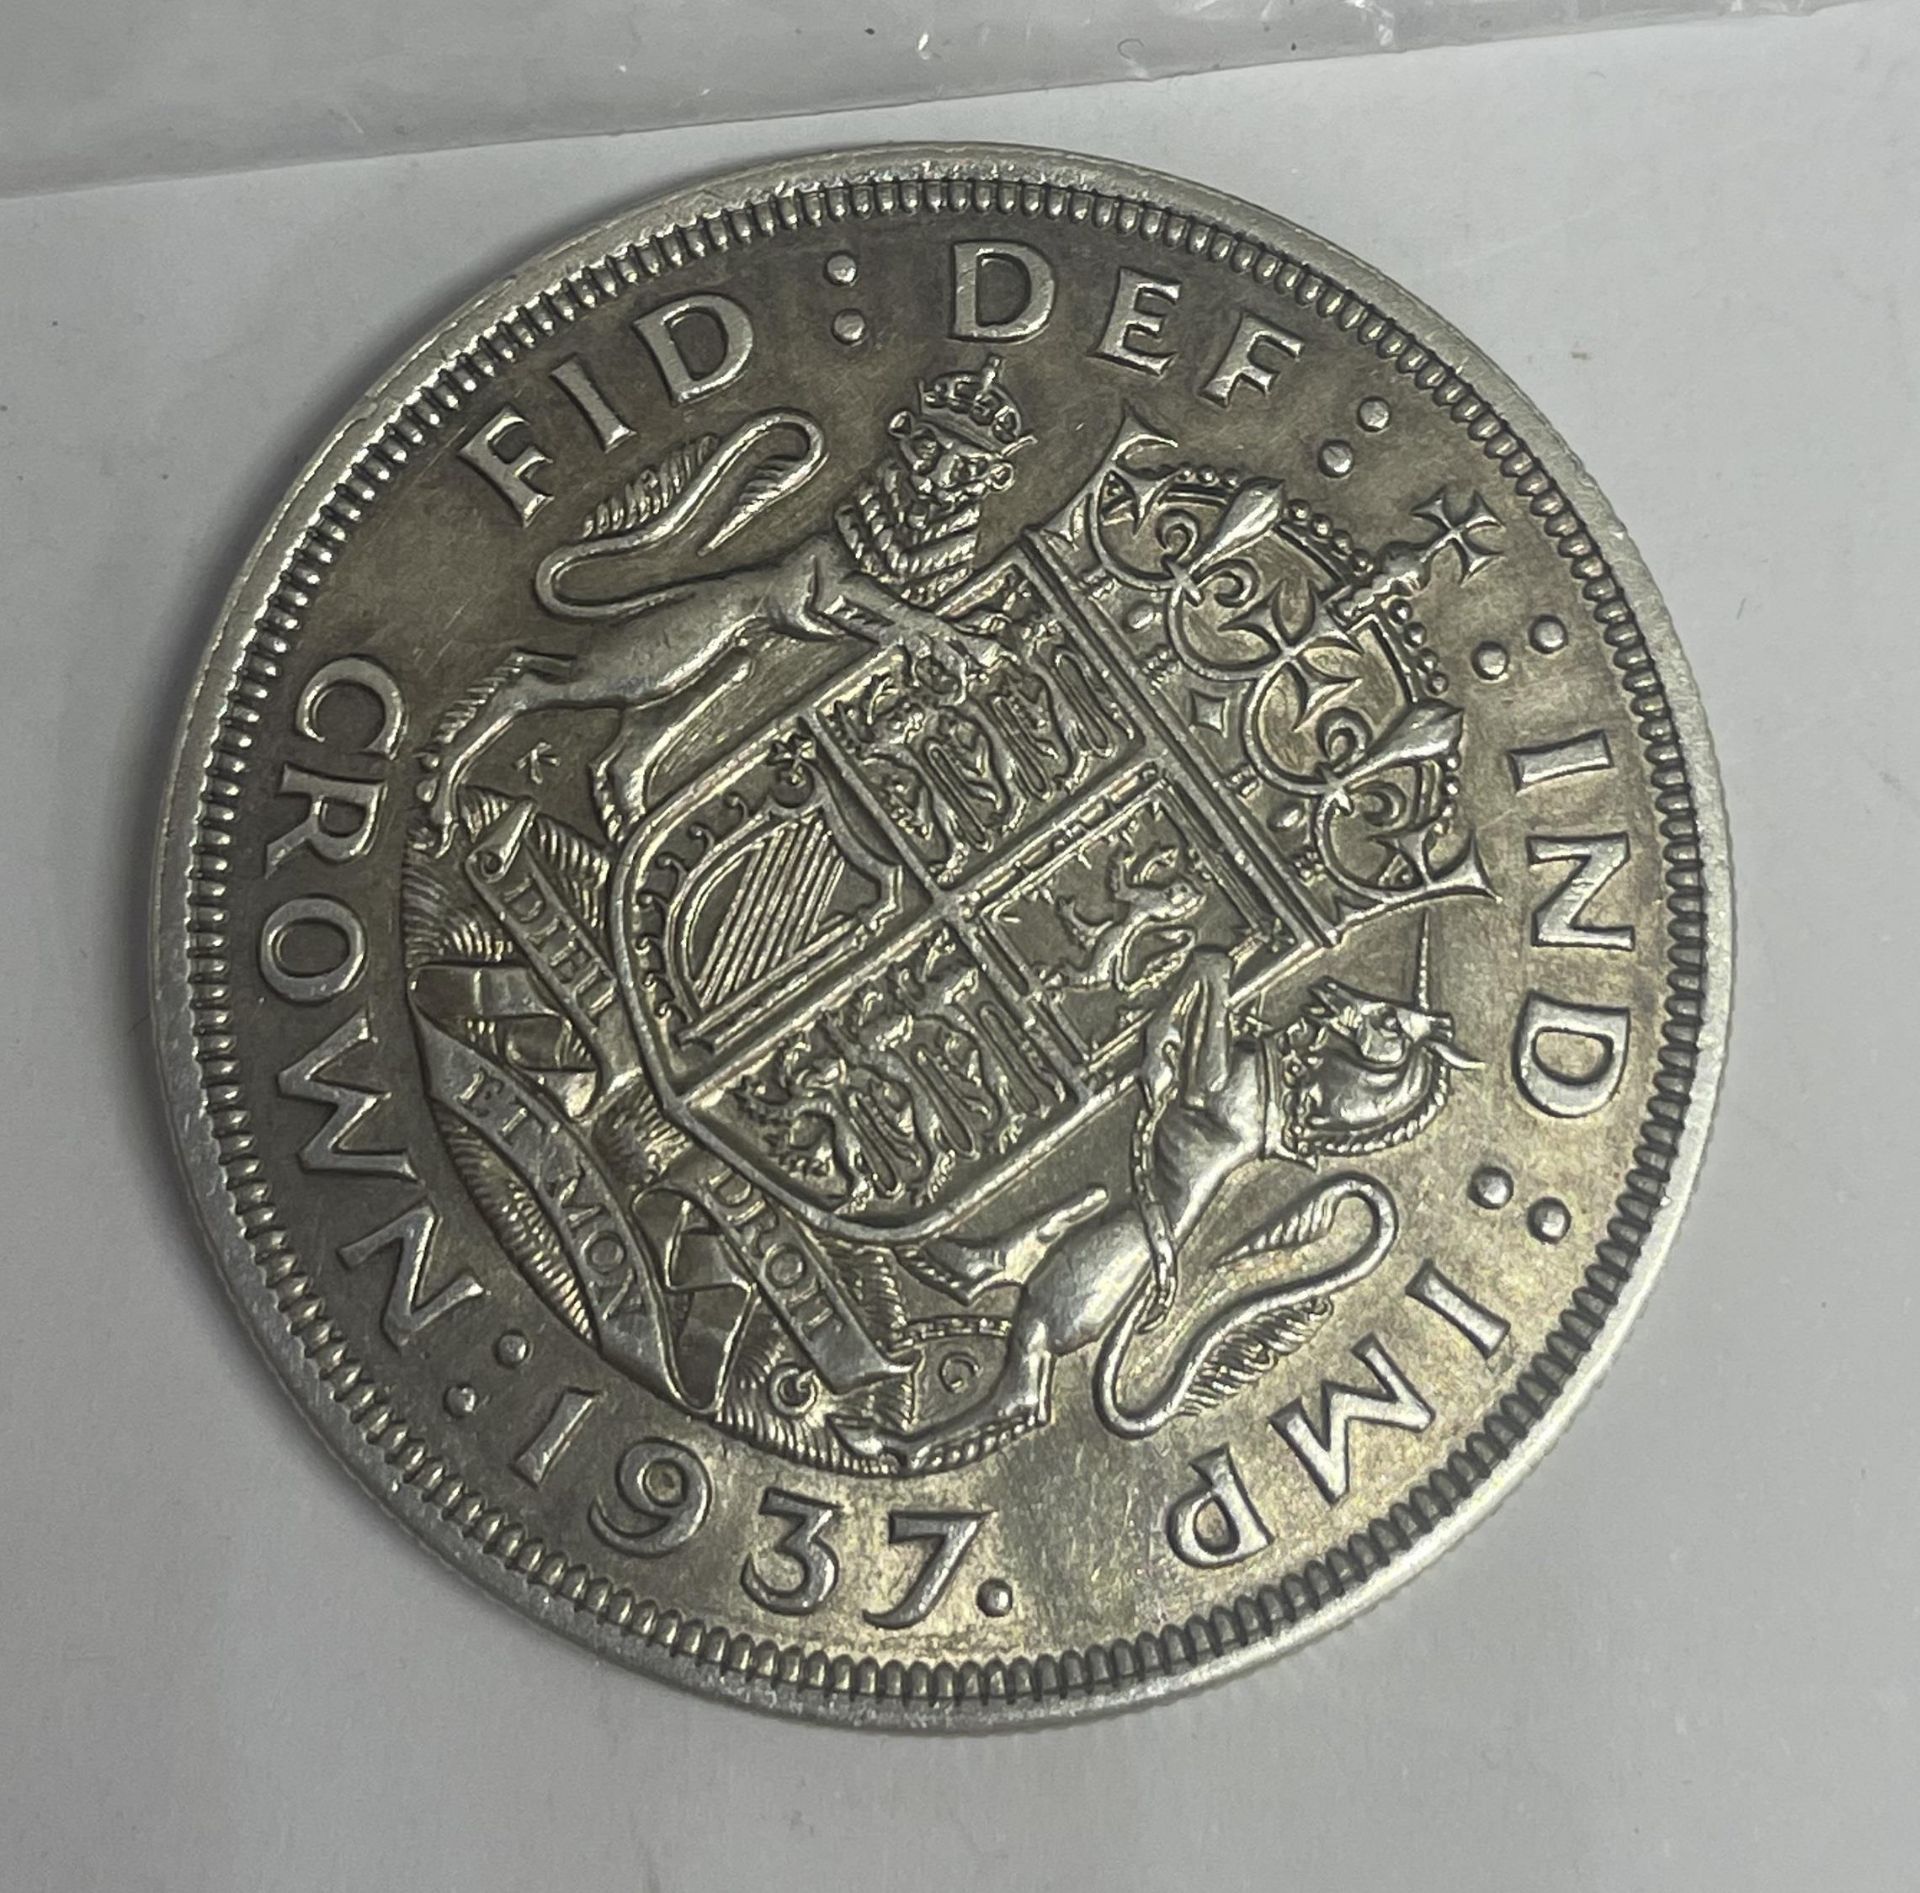 A 1937 LIMITED EDITION SILVER CROWN